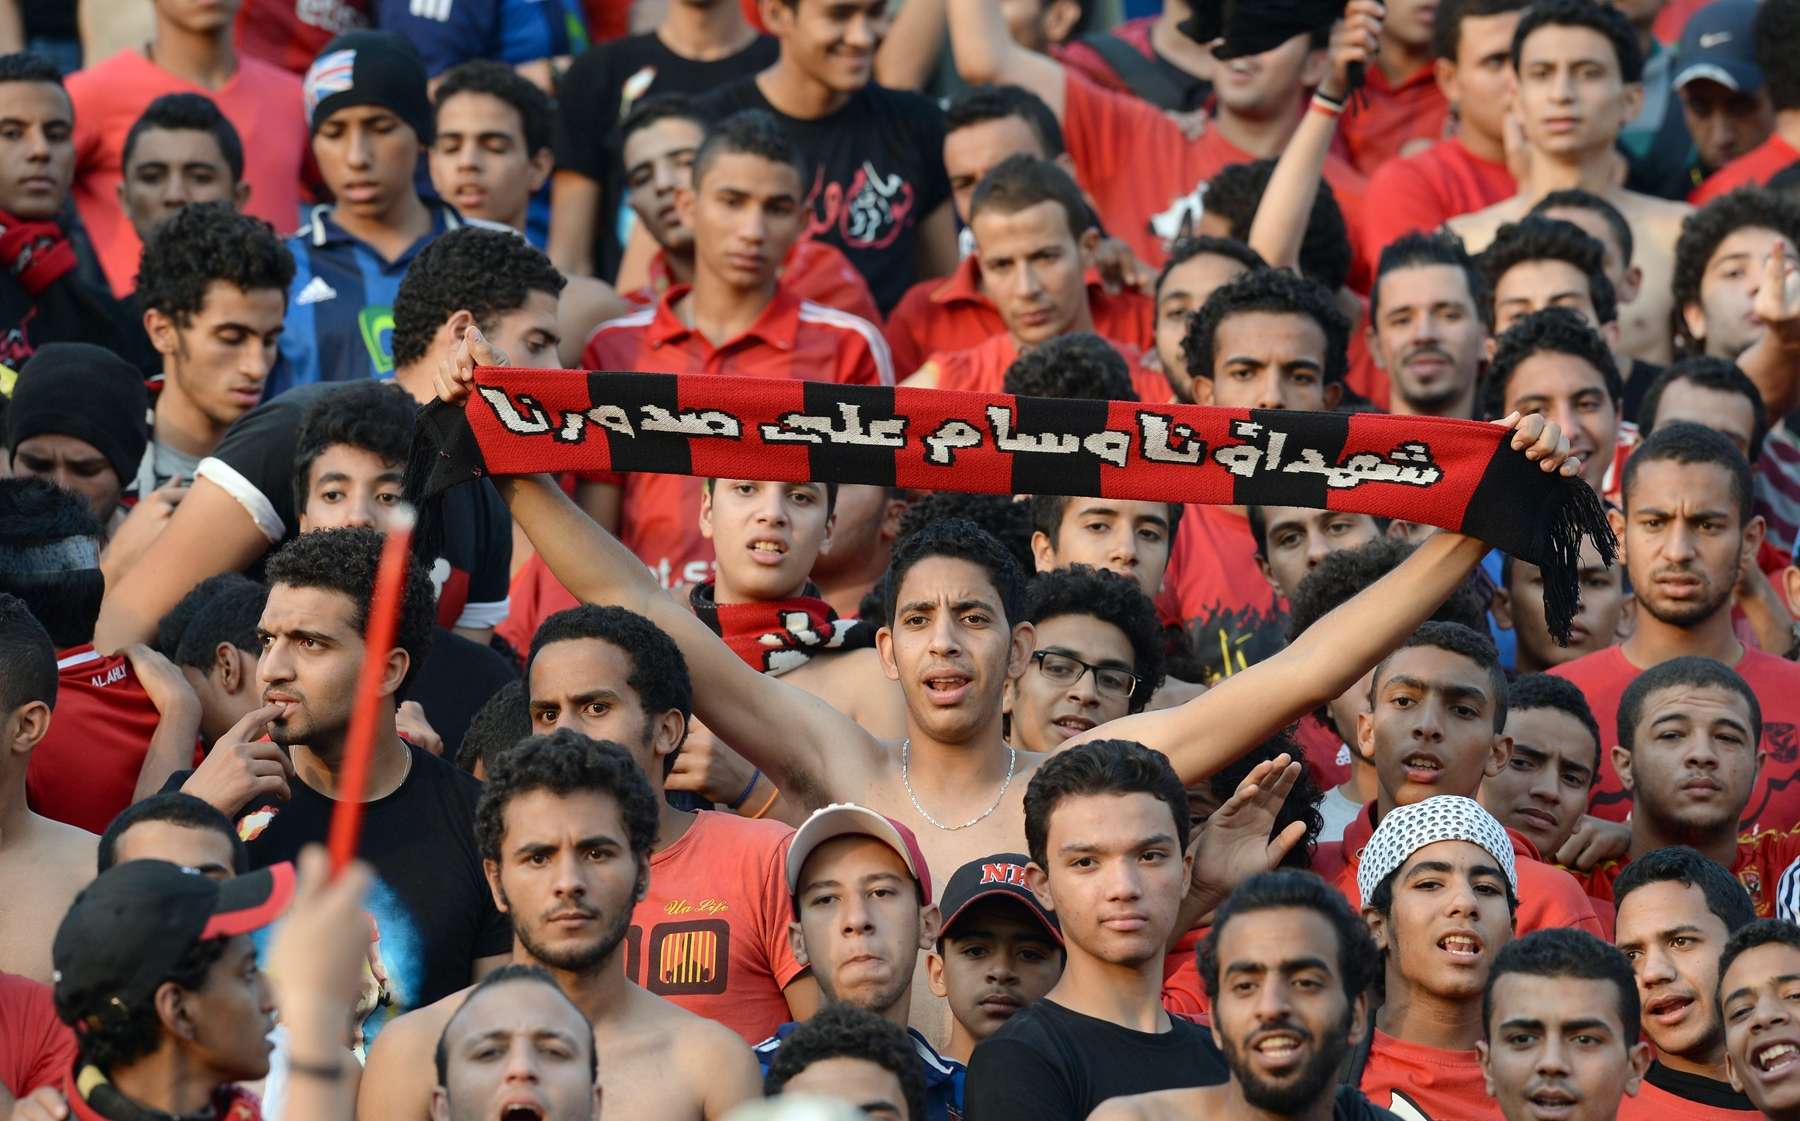 Fans at Orlando Pirates VS Al-Ahly African Champions